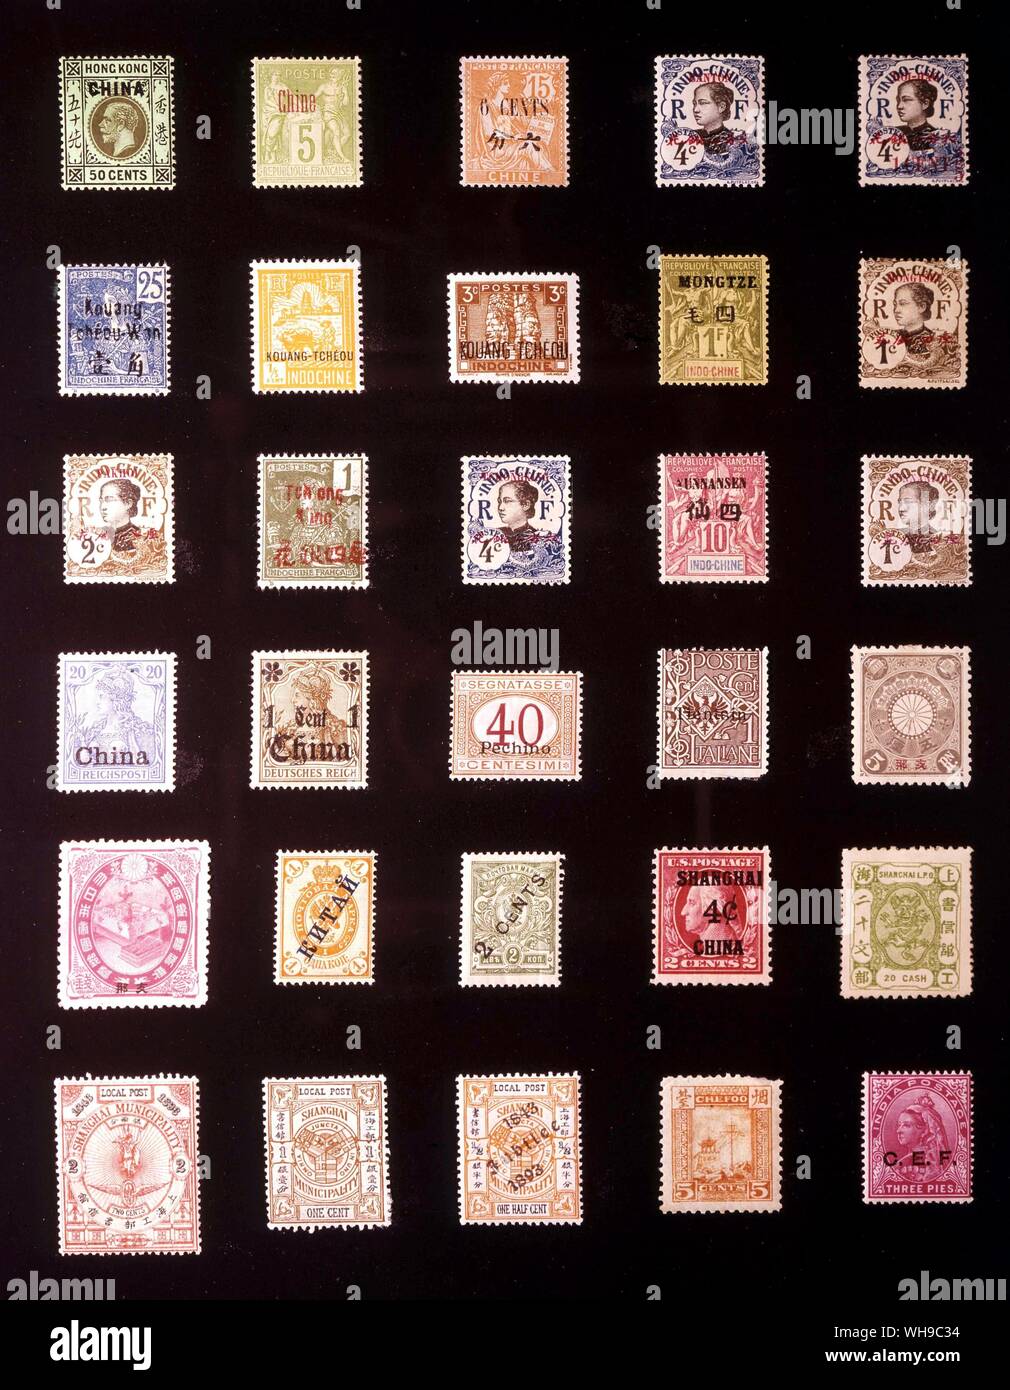 ASIA - FOREIGN POST OFFICES IN CHINA: (left to right) 1. British Post Offices in China, 50 cents, 1917, 2. French Post Offices in China, 5 centimes, 1894, 3. French Post offices in China, 6 cents, 1915, 4. Canton, 4 cents, 1908, 5. Hoi-Hao, 1.6 cents, 1919, 6. Kouang-Tcheou-Wan, 25 centimes, 1906, 7. Kouang-Tcheou, 0,2 cent, 1927, 8. Kouang-Tcheou, 3 cents, 1941, 9. Mongtze, 1 franc, 1903, 10. Mong-Tseu, 1 centime, 1908, 11. Pakhoi, 2 centimes, 1908, 12. Tchongking, 1 centime, 1906, 13. Tchongking, 4 centimes, 1908, 14. Yunnansen, 10 centimes, 1903, 15. Yunnan-Fou, 1 centime, 1908, 16. German Stock Photo